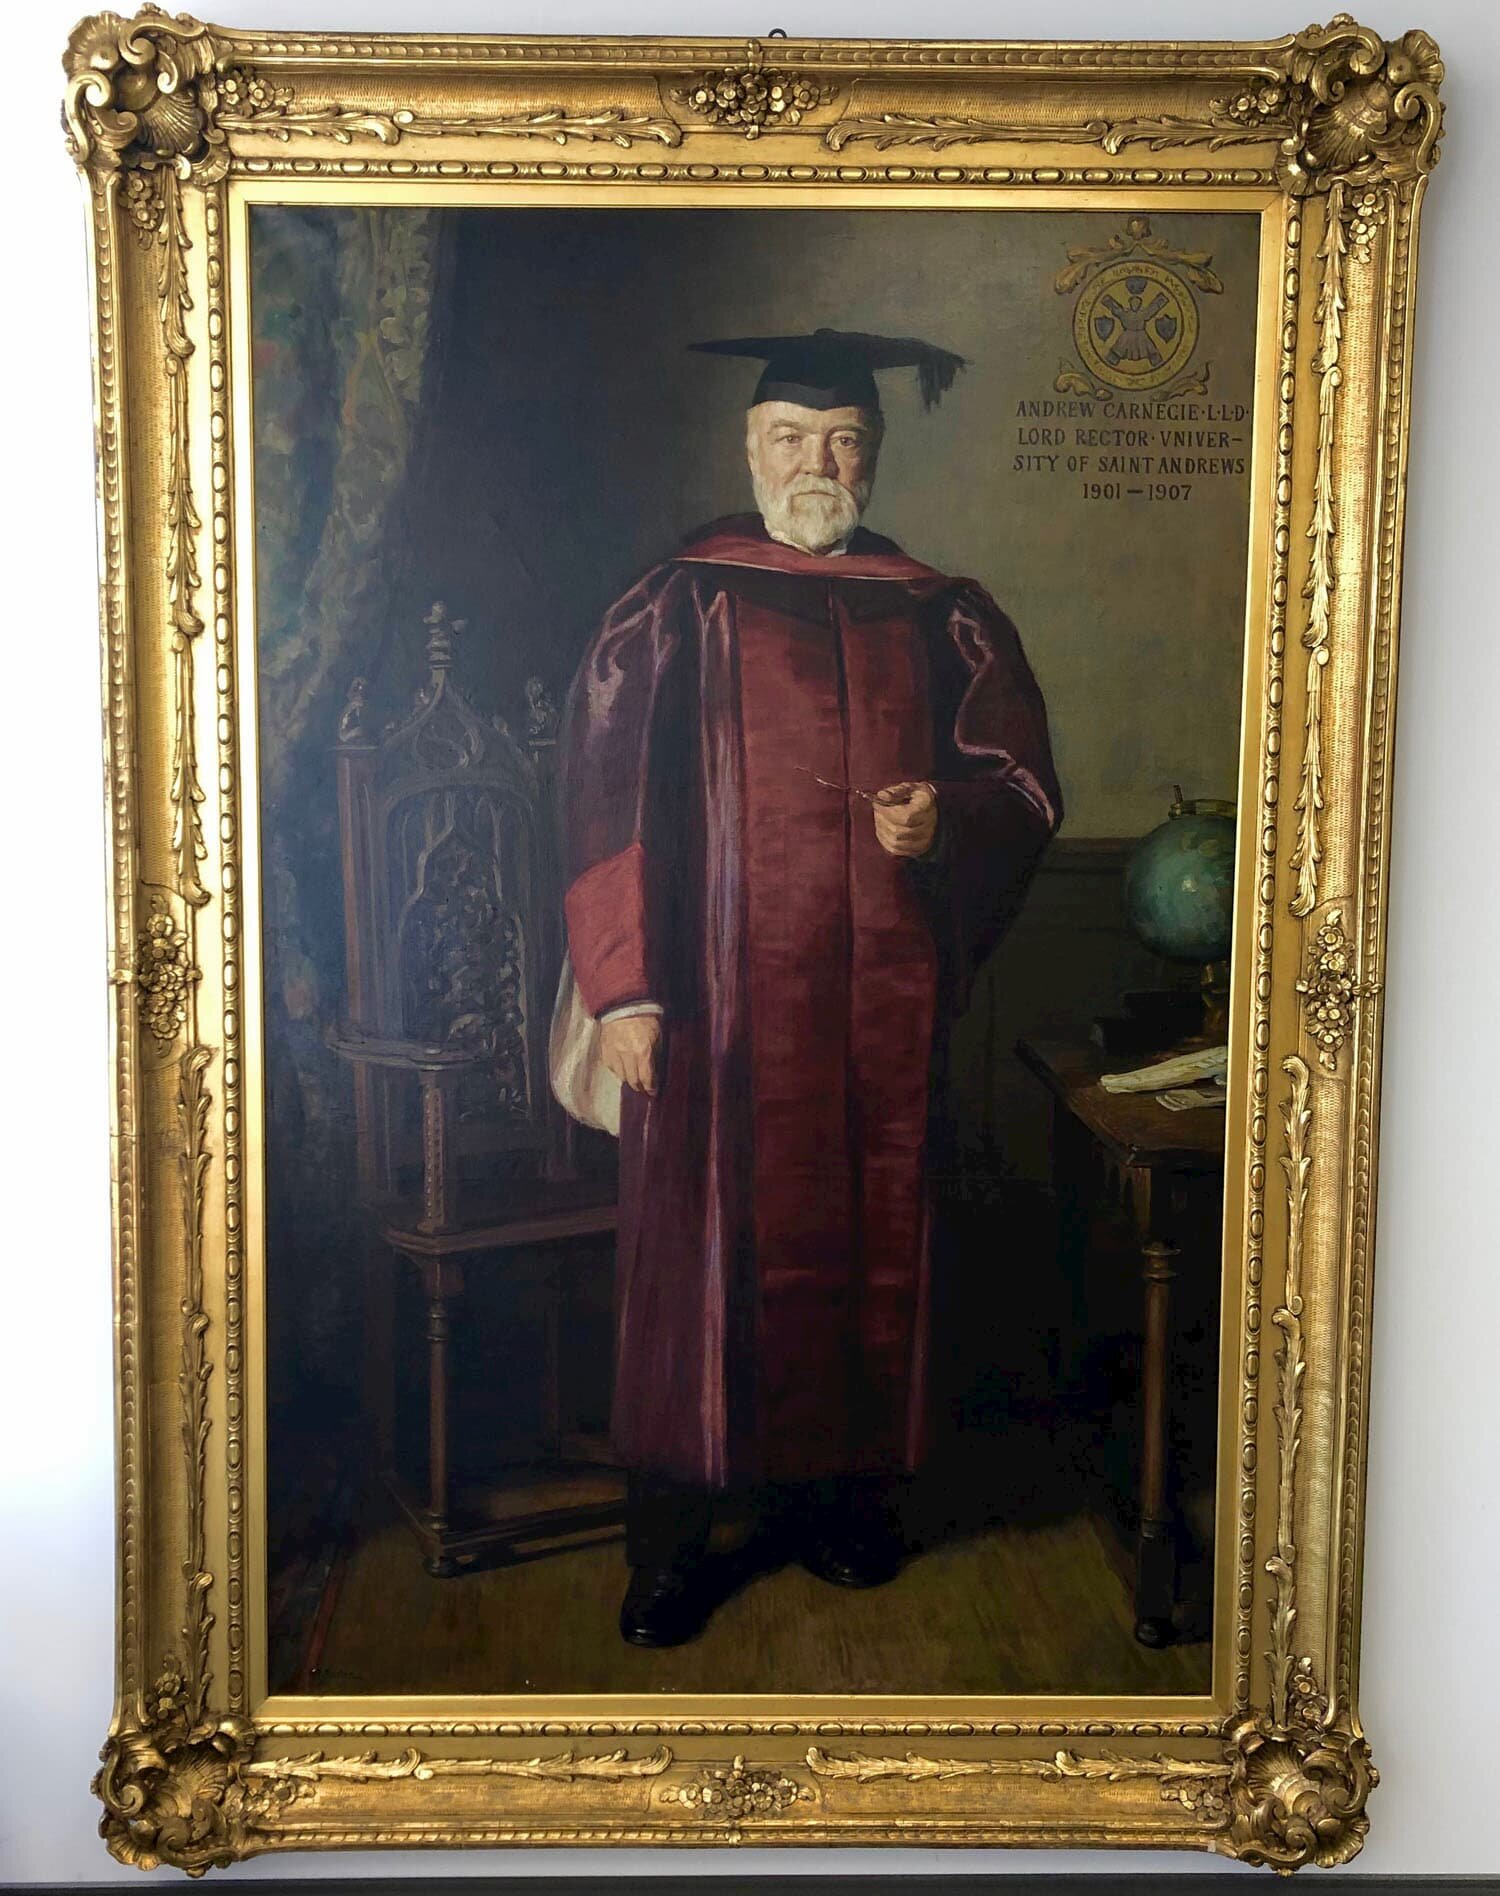  This portrait of Andrew Carnegie wearing St Andrews University’s rectorial robes is at the Carnegie Mellon University. It looks very similar to the one at the Andrew Carnegie Birthplace Museum! How many differences can you spot? 